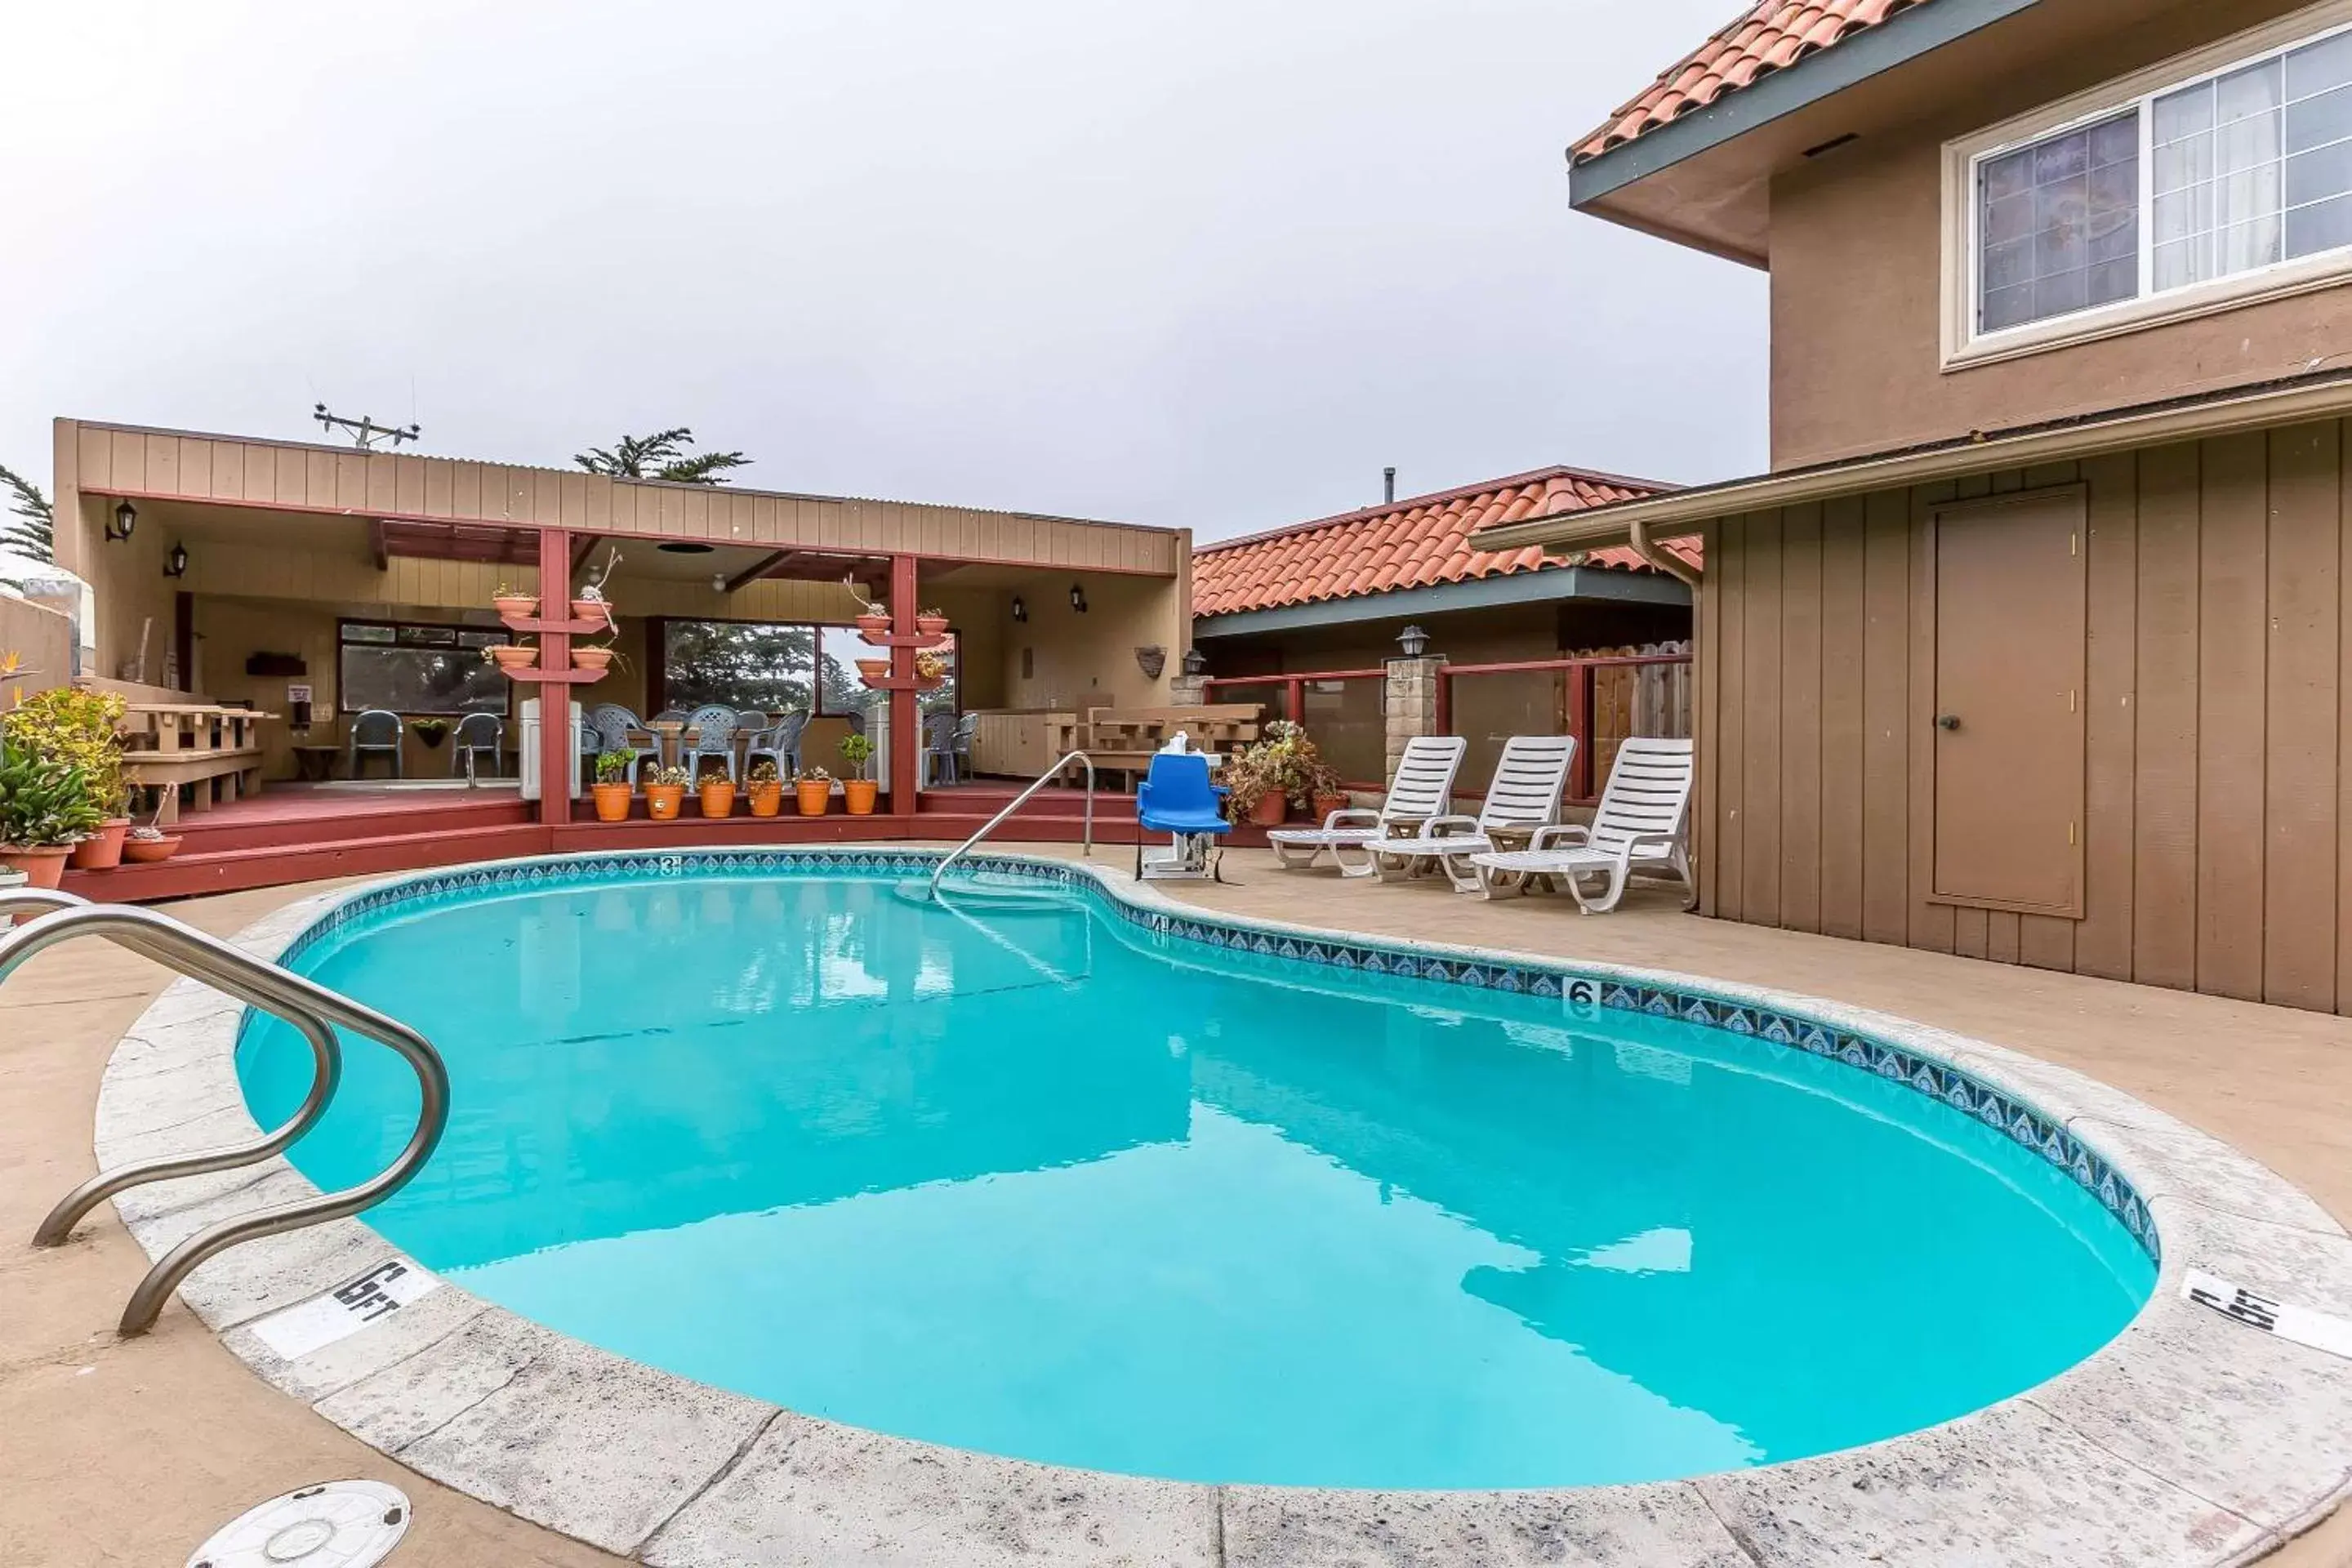 On site, Swimming Pool in Quality Inn near Hearst Castle